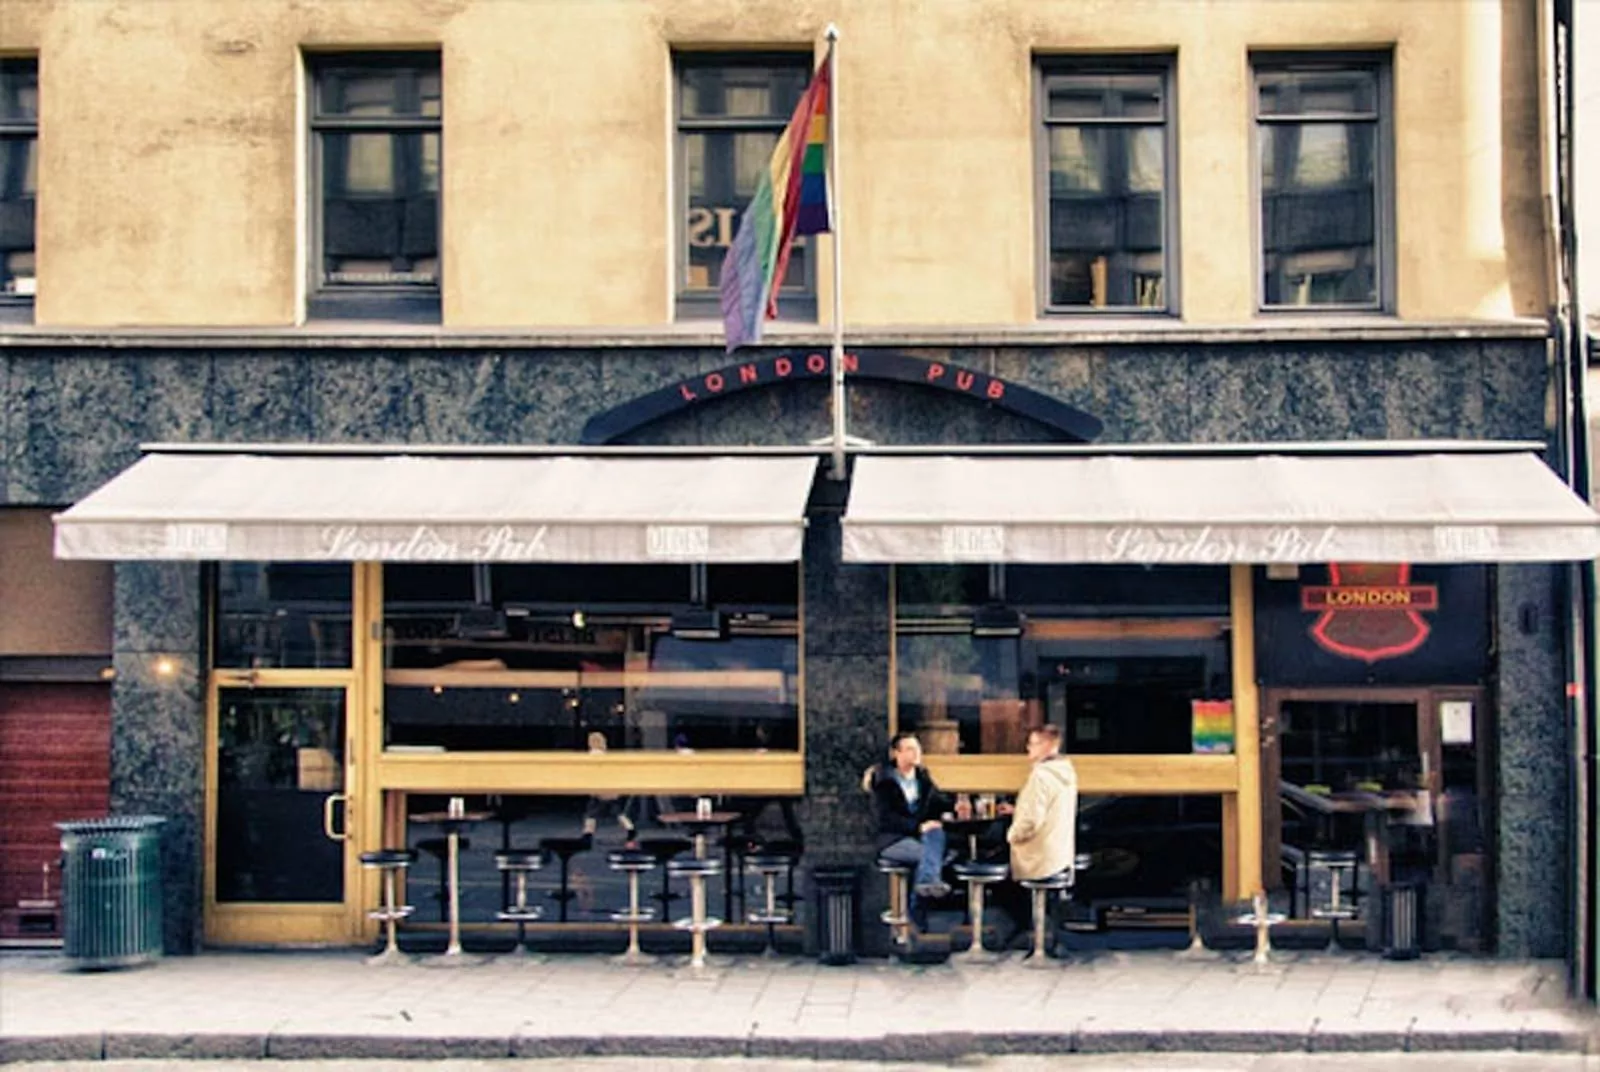 London Pub in Norway, Europe | LGBT-Friendly Places,Bars - Rated 0.8